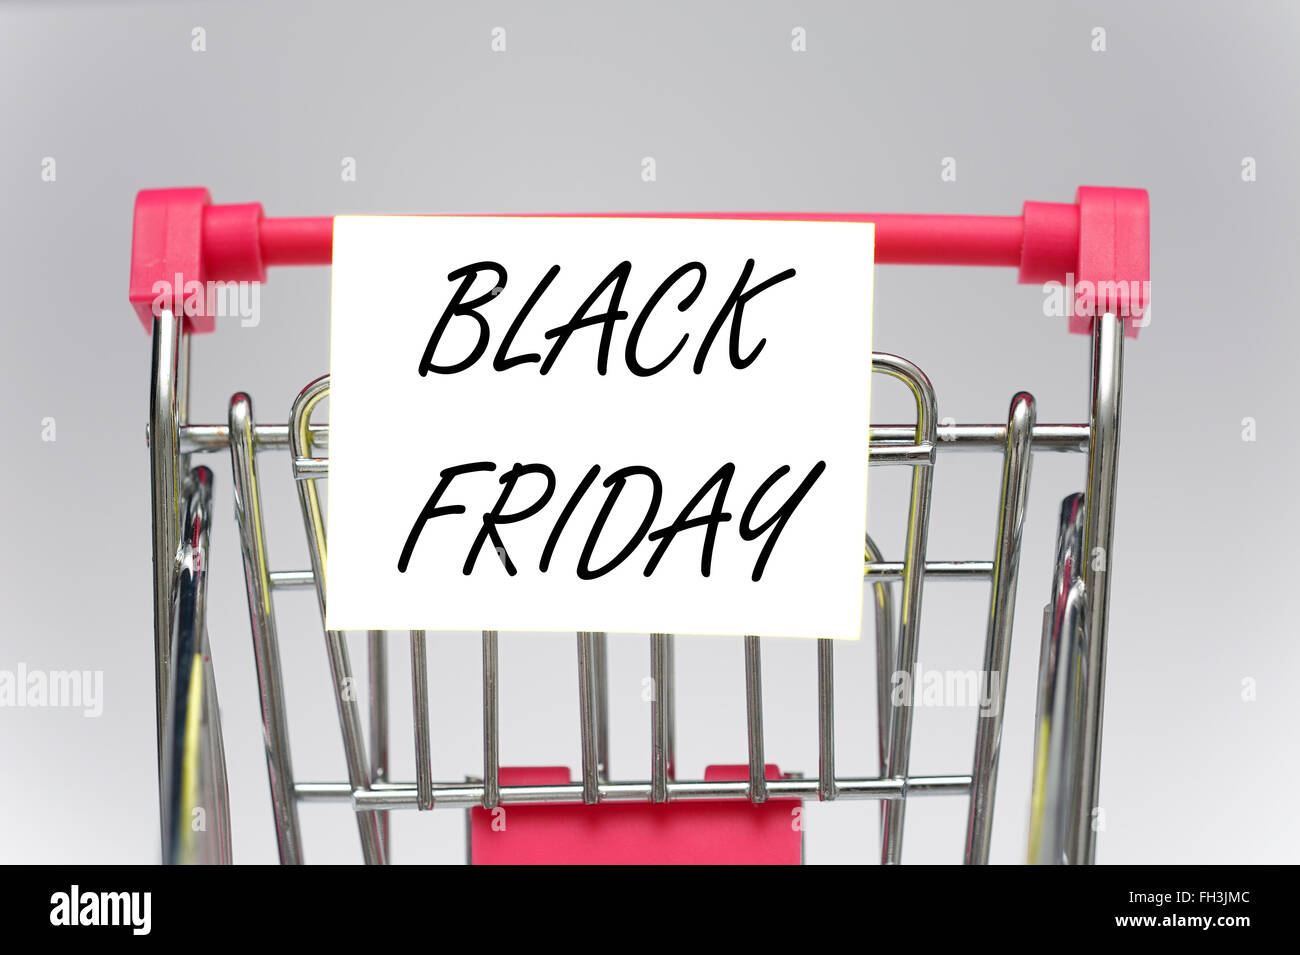 Black Friday on a supermarket shopping trolley Stock Photo